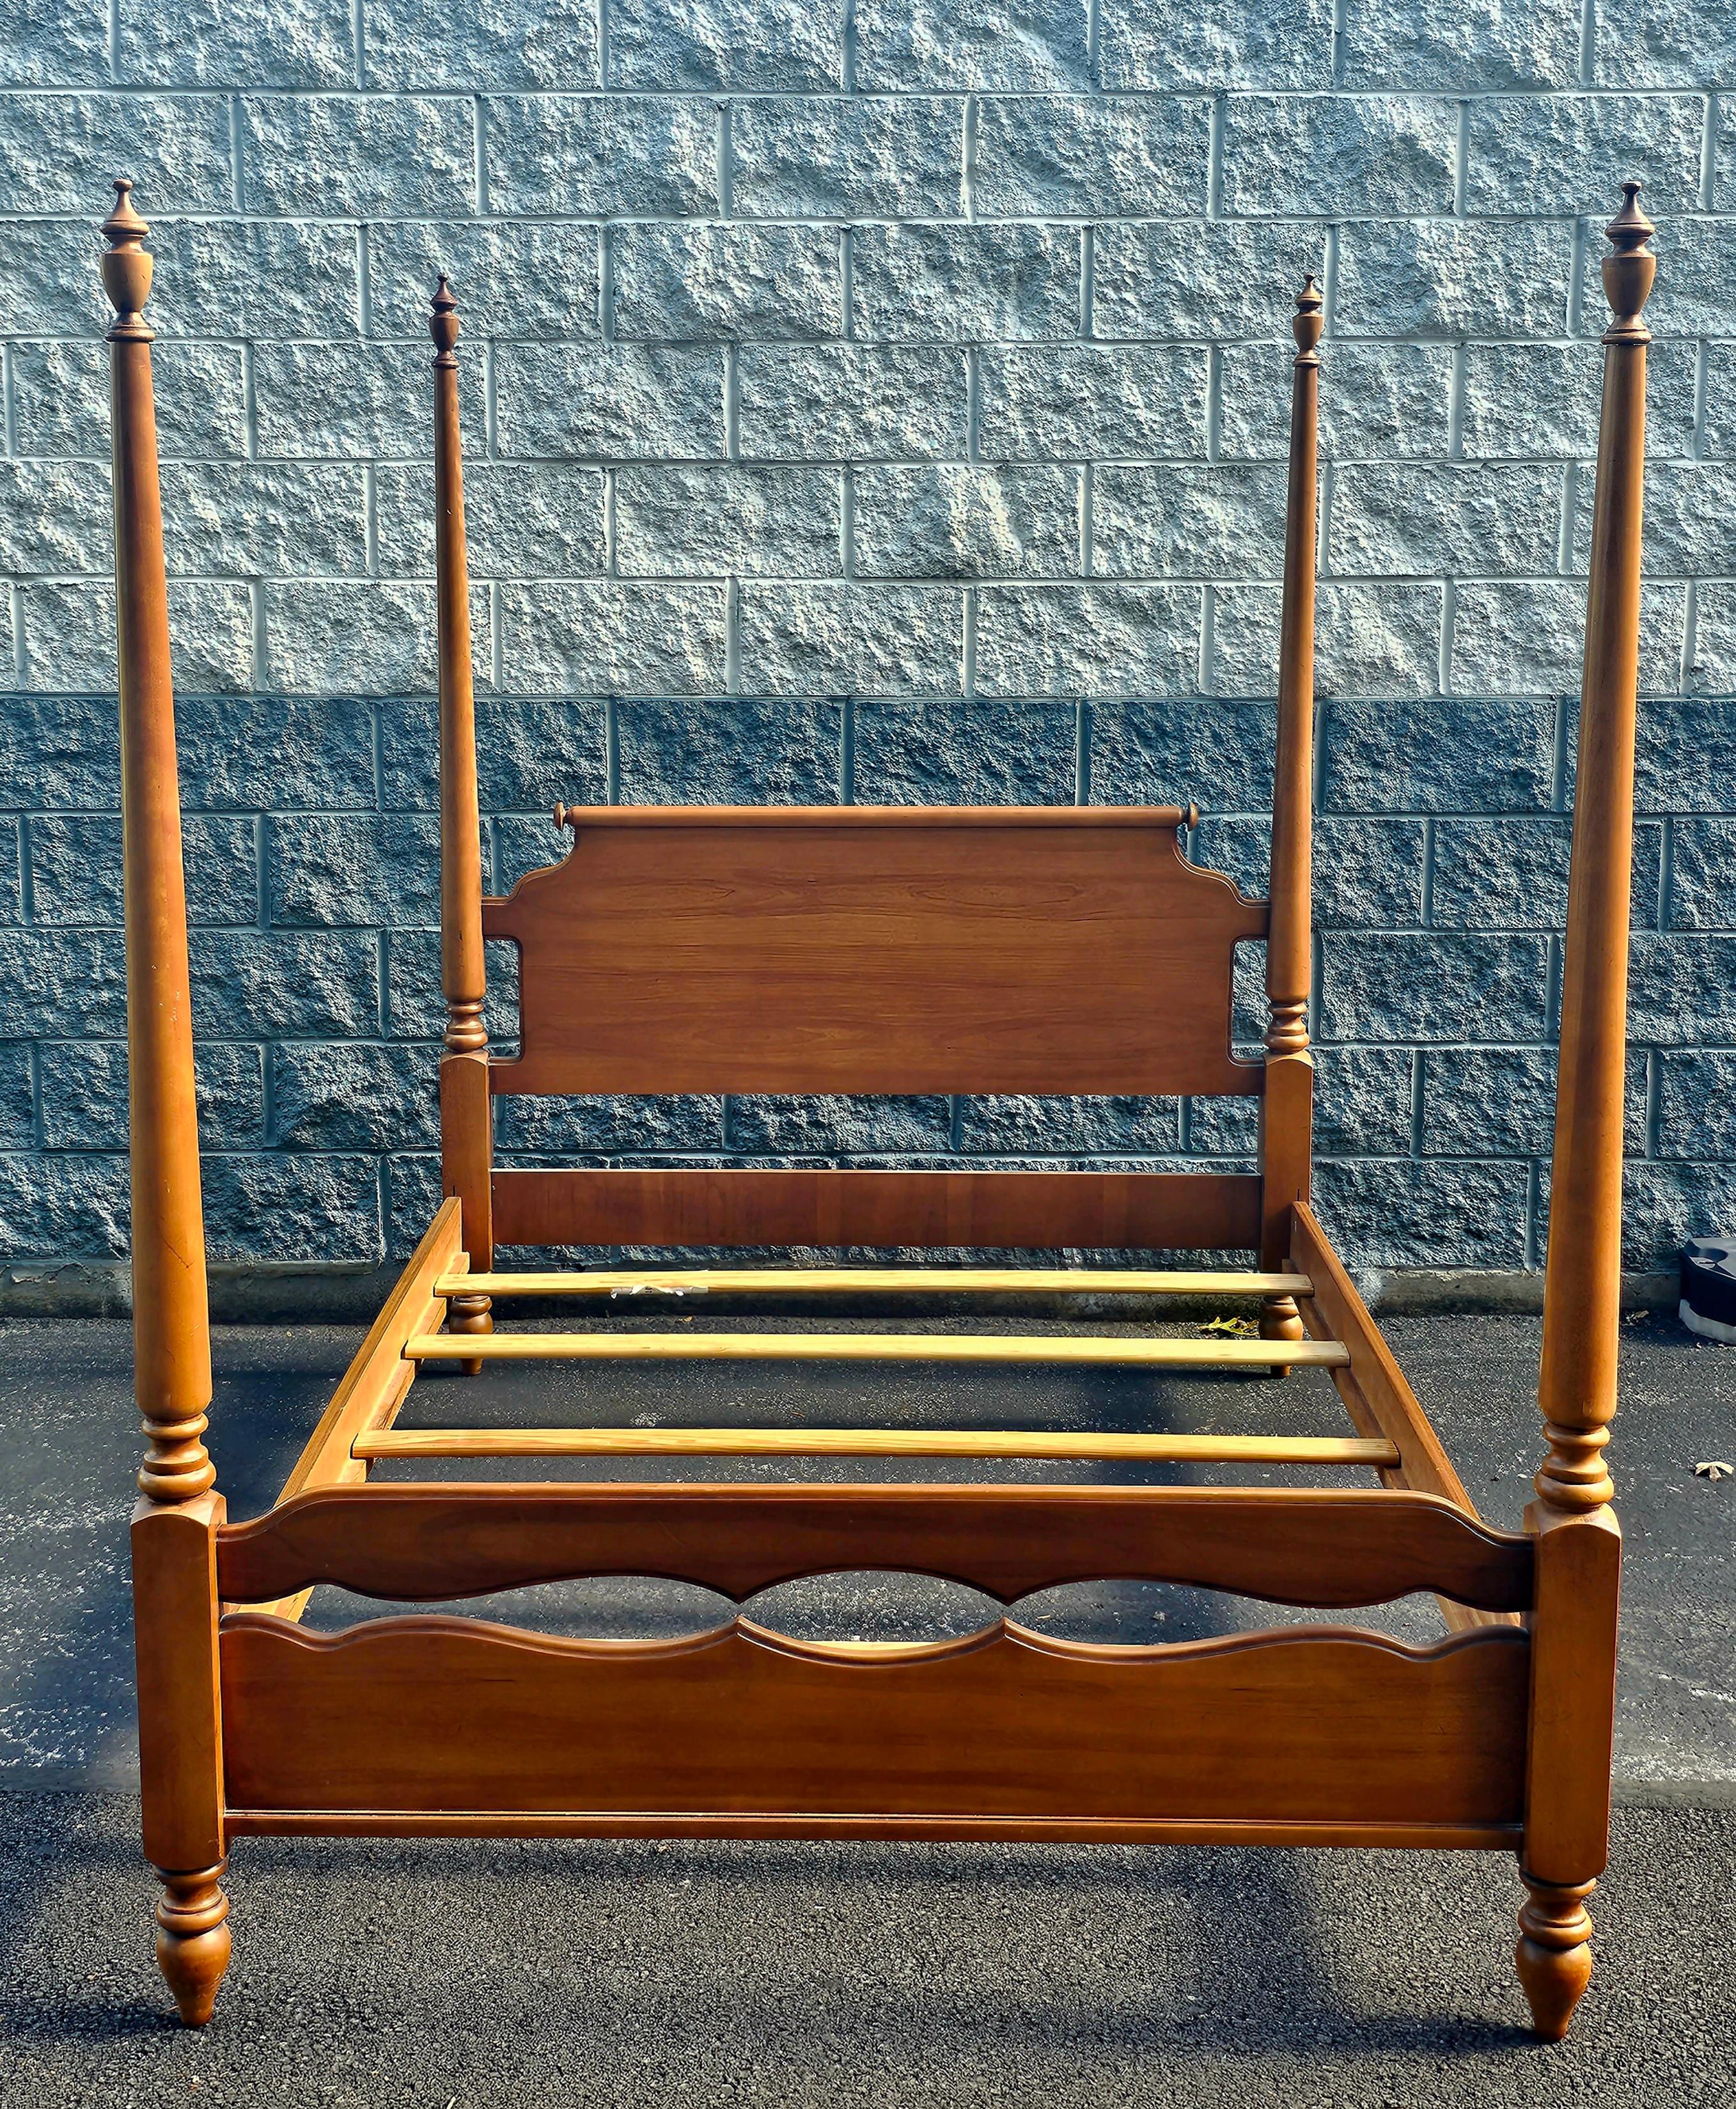 1960s Solid Maple Full Size Poster Bedstead in great vintage condition. The bed has been recently refinished and looks absolutely gorgeous. Measures 56.5